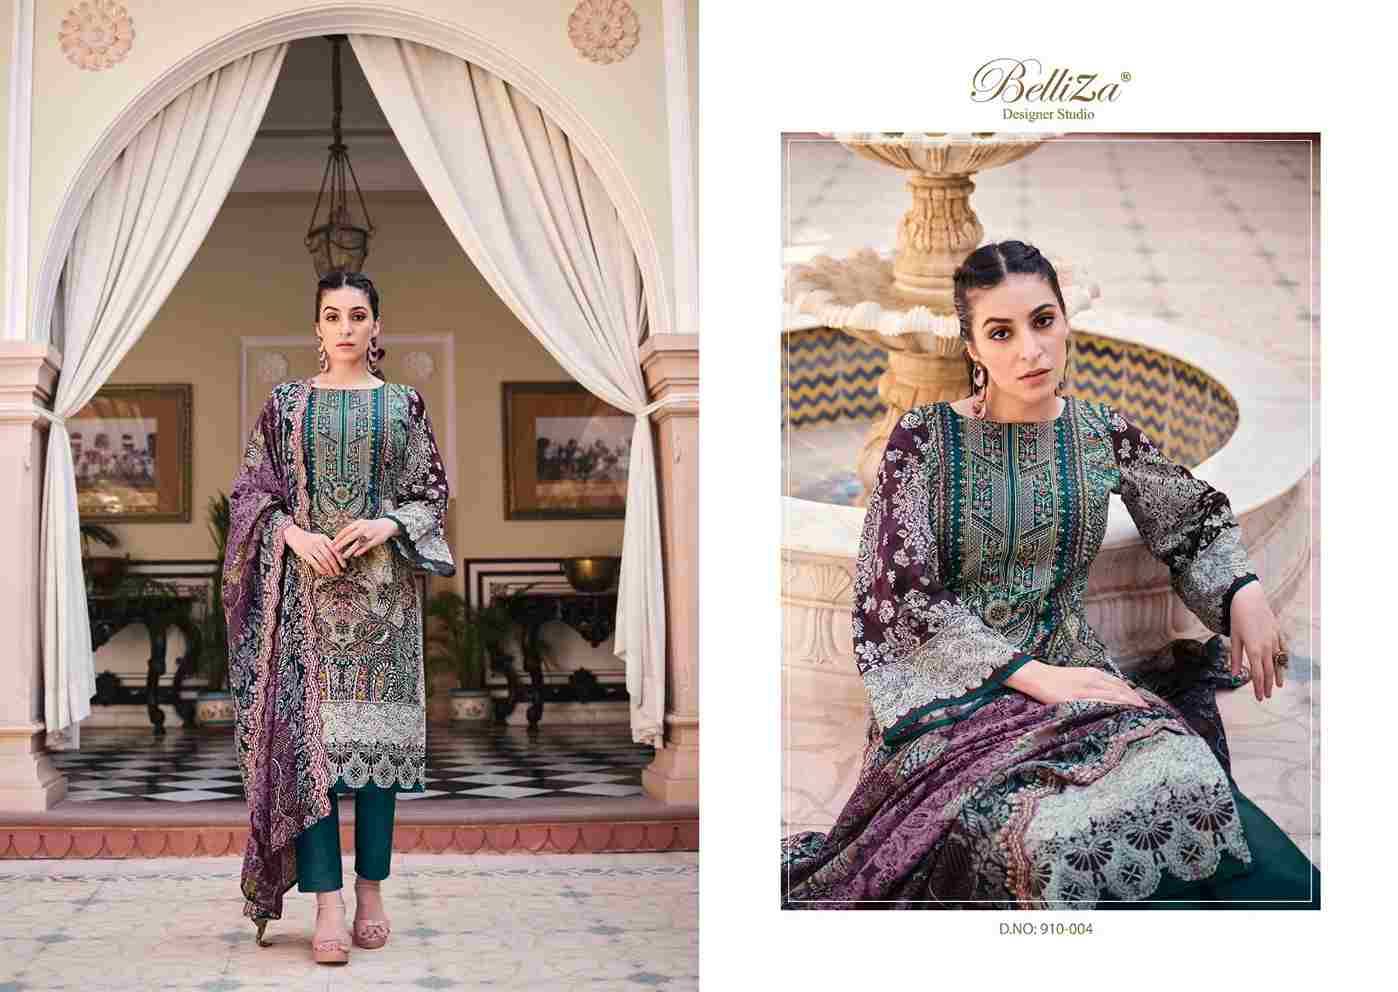 Guzarish Vol-7 By Belliza 910-001 To 910-008 Series Beautiful Stylish Festive Suits Fancy Colorful Casual Wear & Ethnic Wear & Ready To Wear Pure Cotton Digital Print Dresses At Wholesale Price